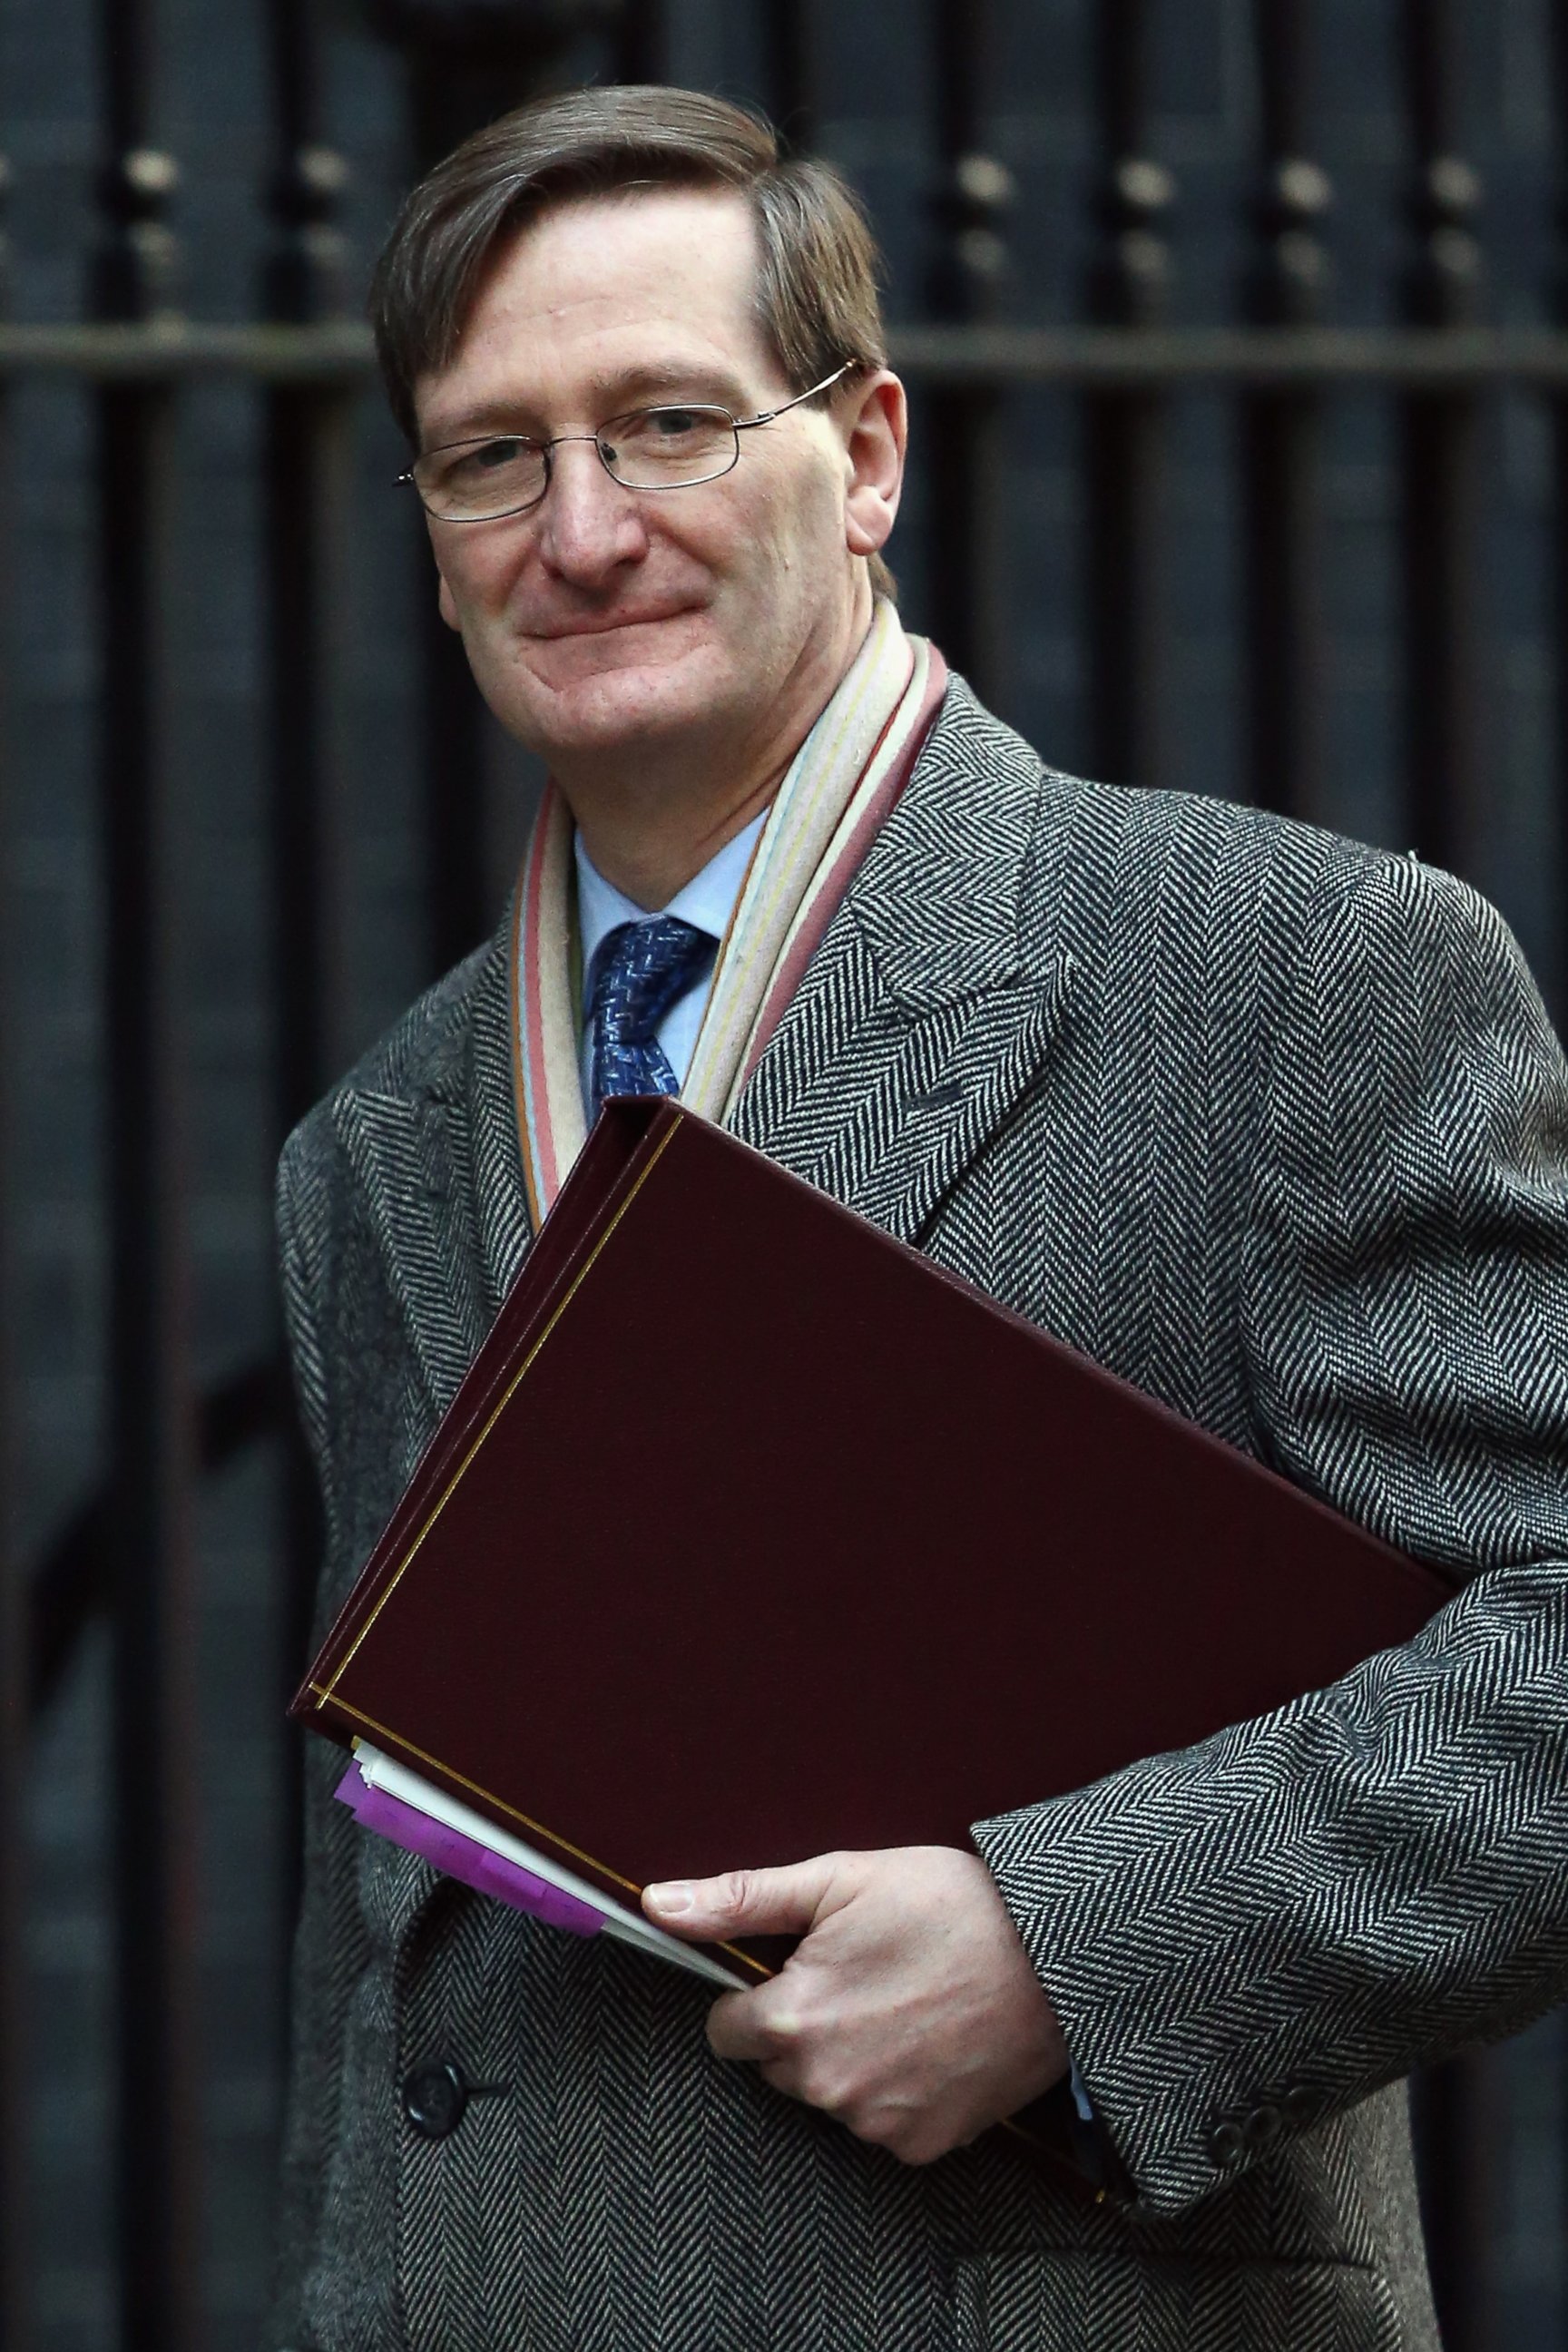 PHOTO: Dominic Grieve is pictured on Feb. 4, 2014 in London.  